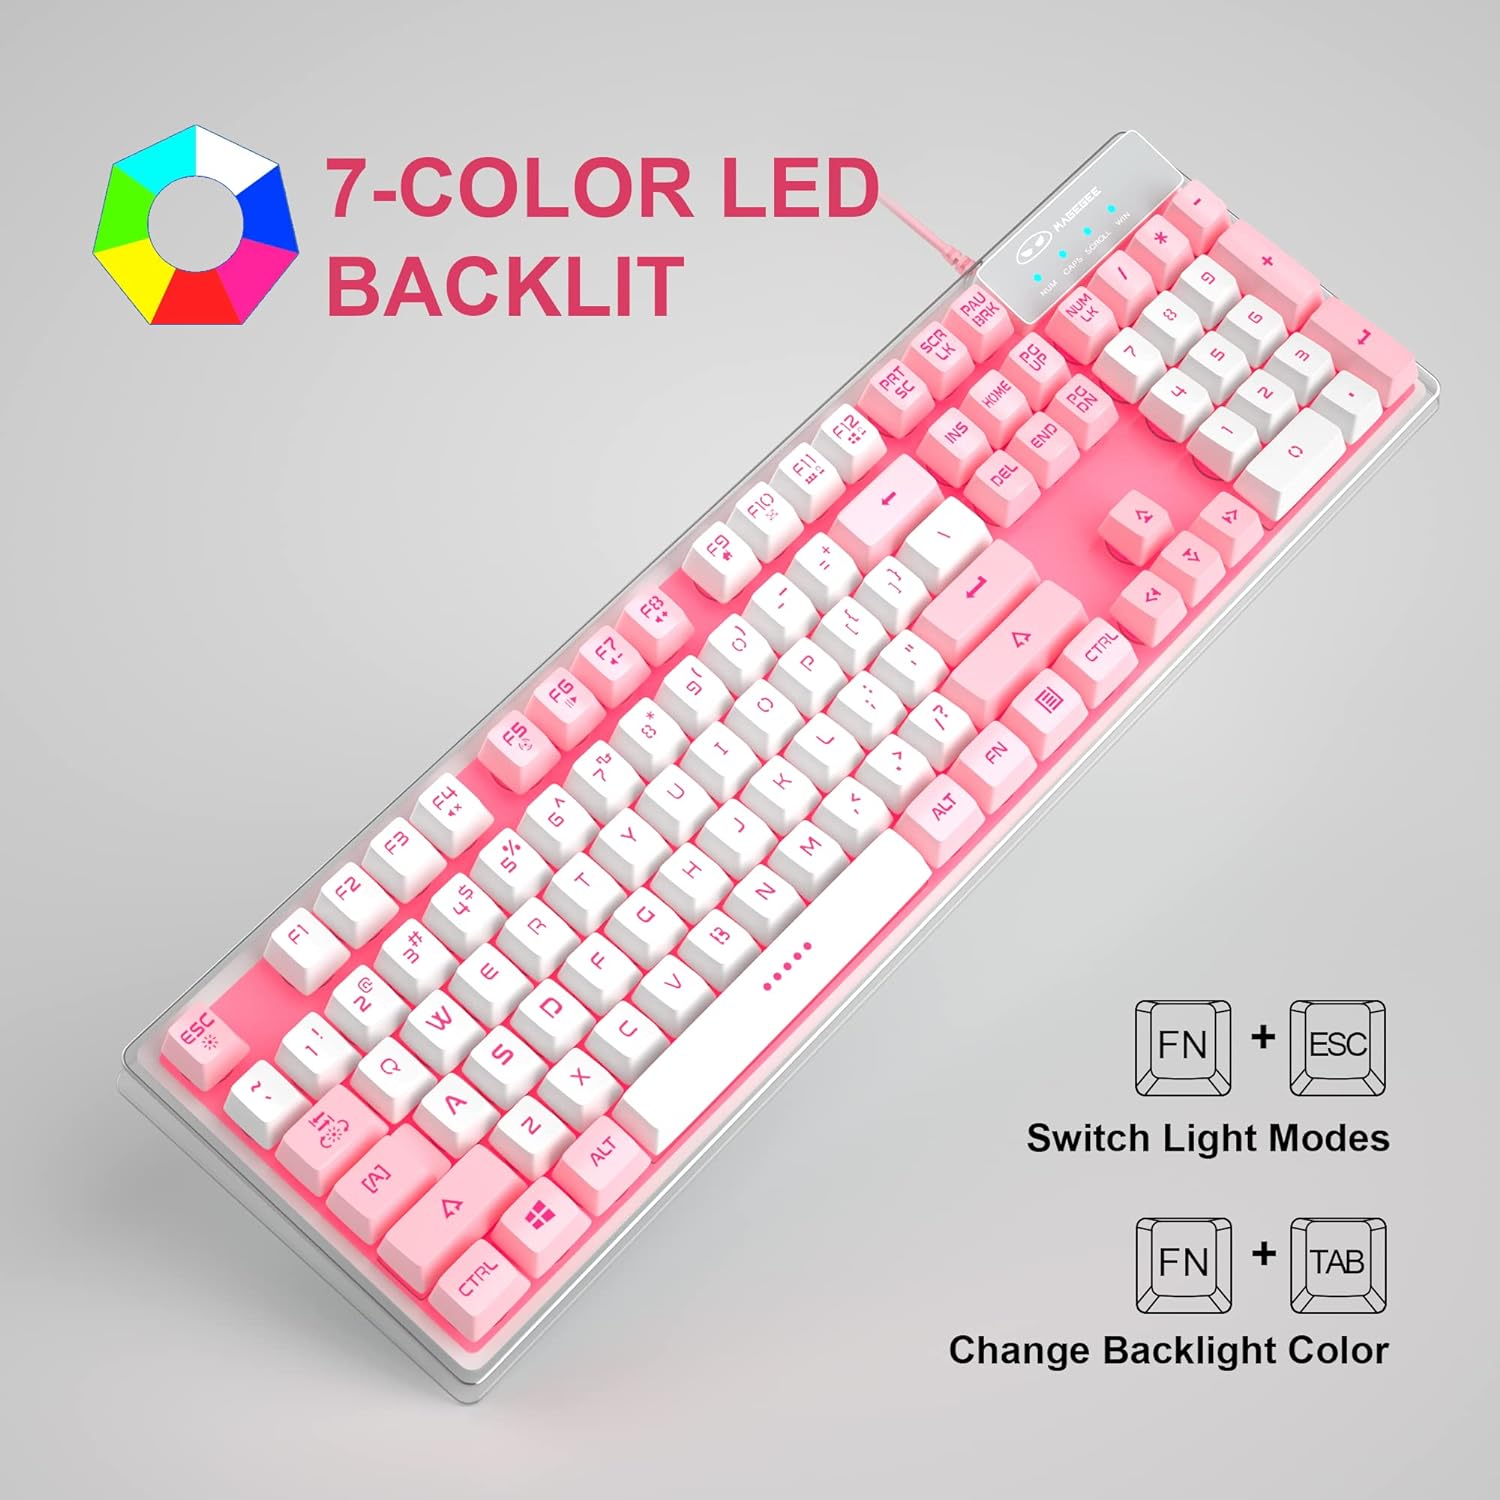 Gaming Keyboard, 7 Colors Backlit Wired Gaming Keyboard with Clear Housing and Double-Shot Keycaps, MageGee K1 Waterproof Ergonomic 104 Keys Light Up Keyboard for PC Desktop Laptop, Pink & White